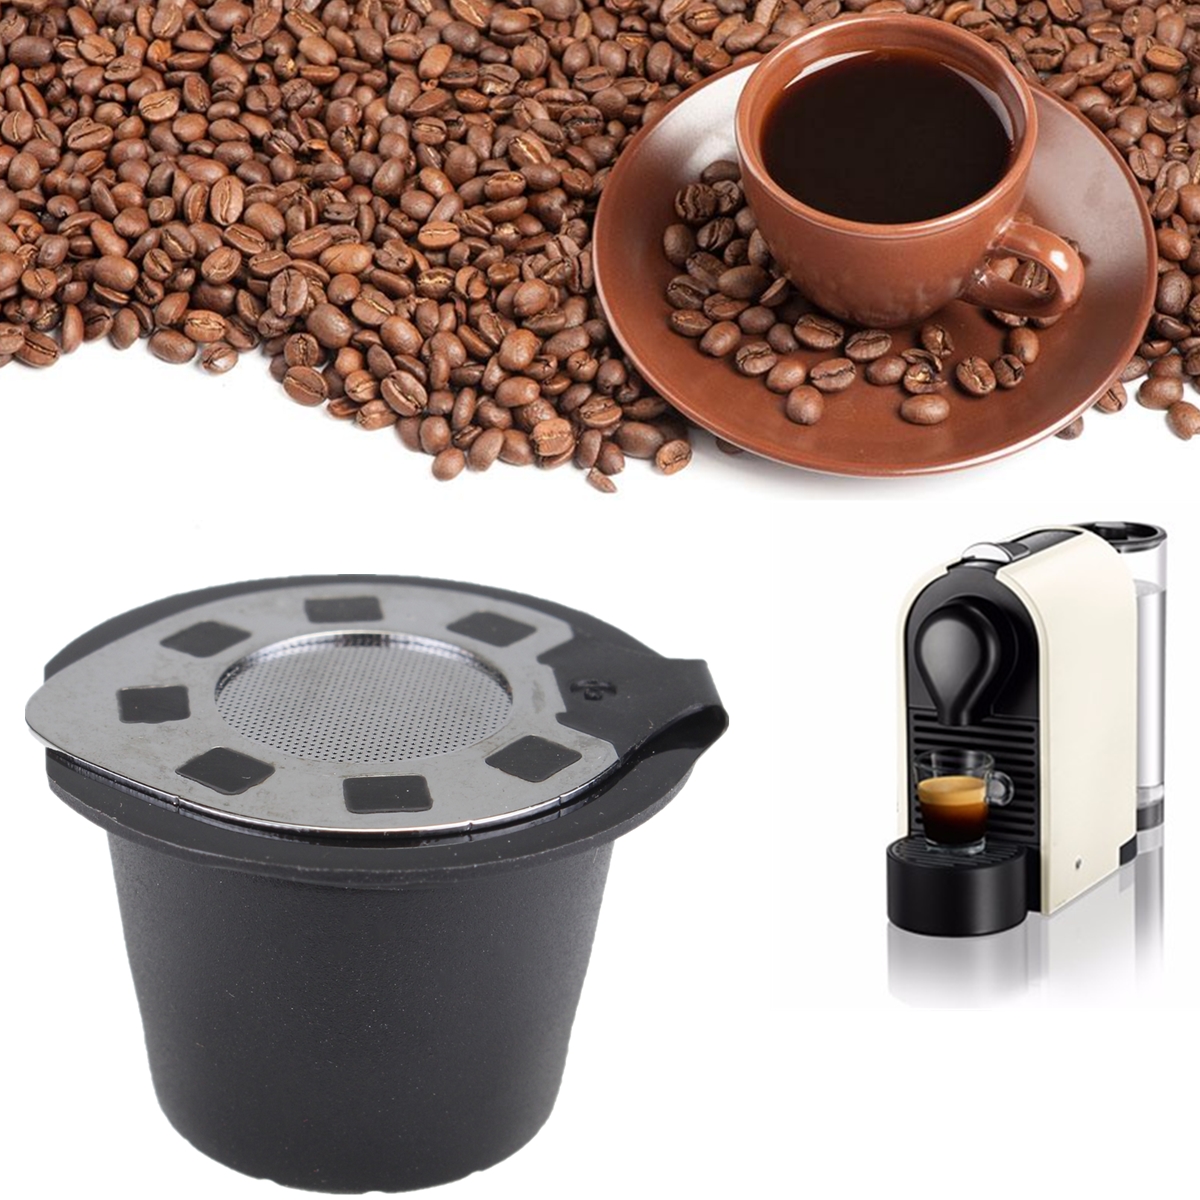 Stainless-Steel-Refillable-Reusable-Coffee-Capsule-Cup-Pod-Filter-Tool-For-Nespresso-1331700